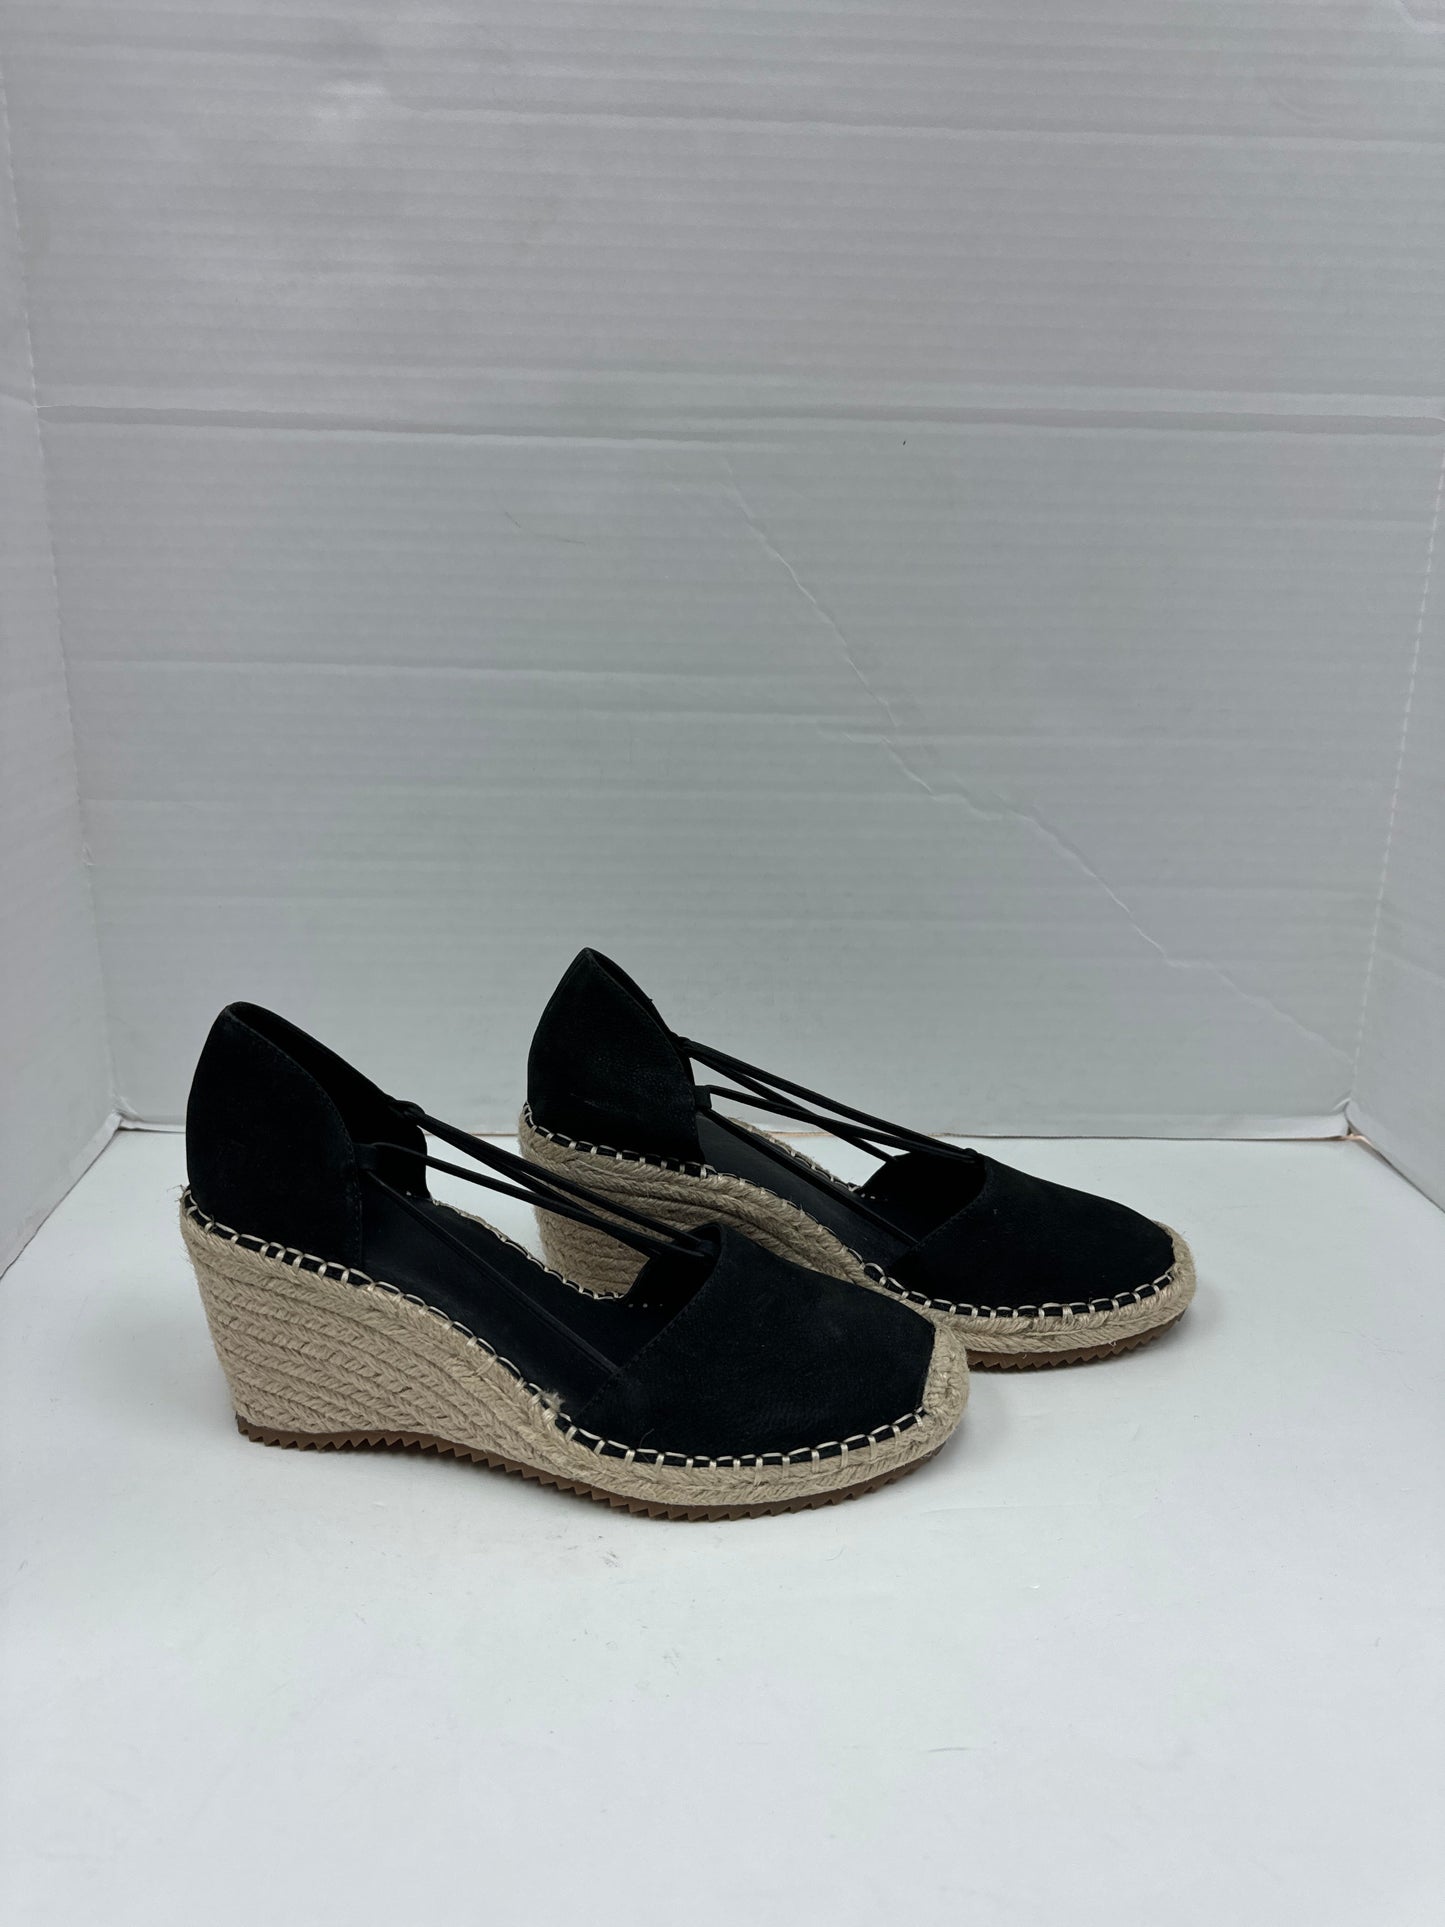 Shoes Heels Wedge By Eileen Fisher  Size: 6